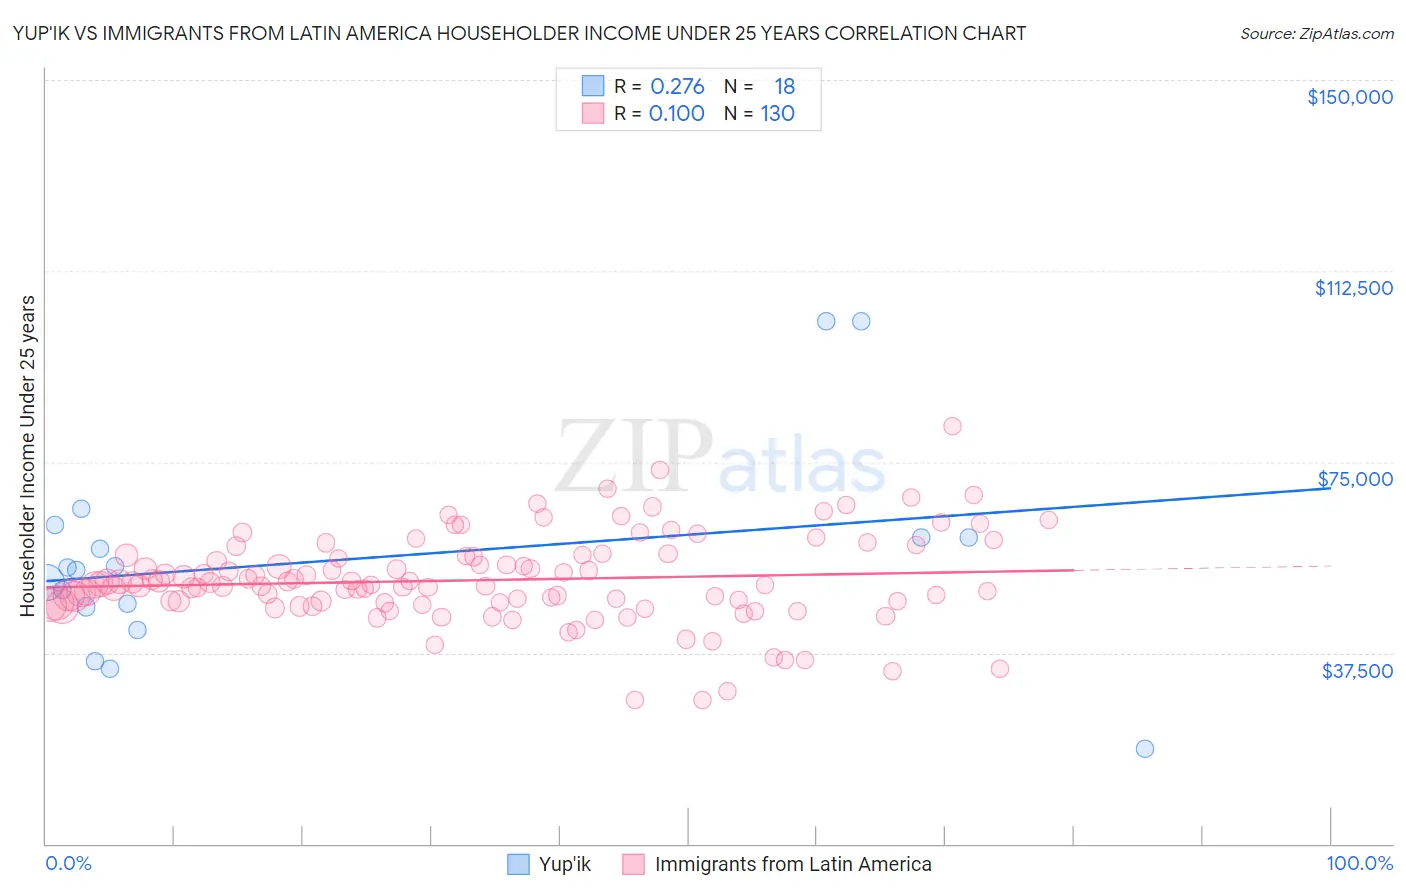 Yup'ik vs Immigrants from Latin America Householder Income Under 25 years